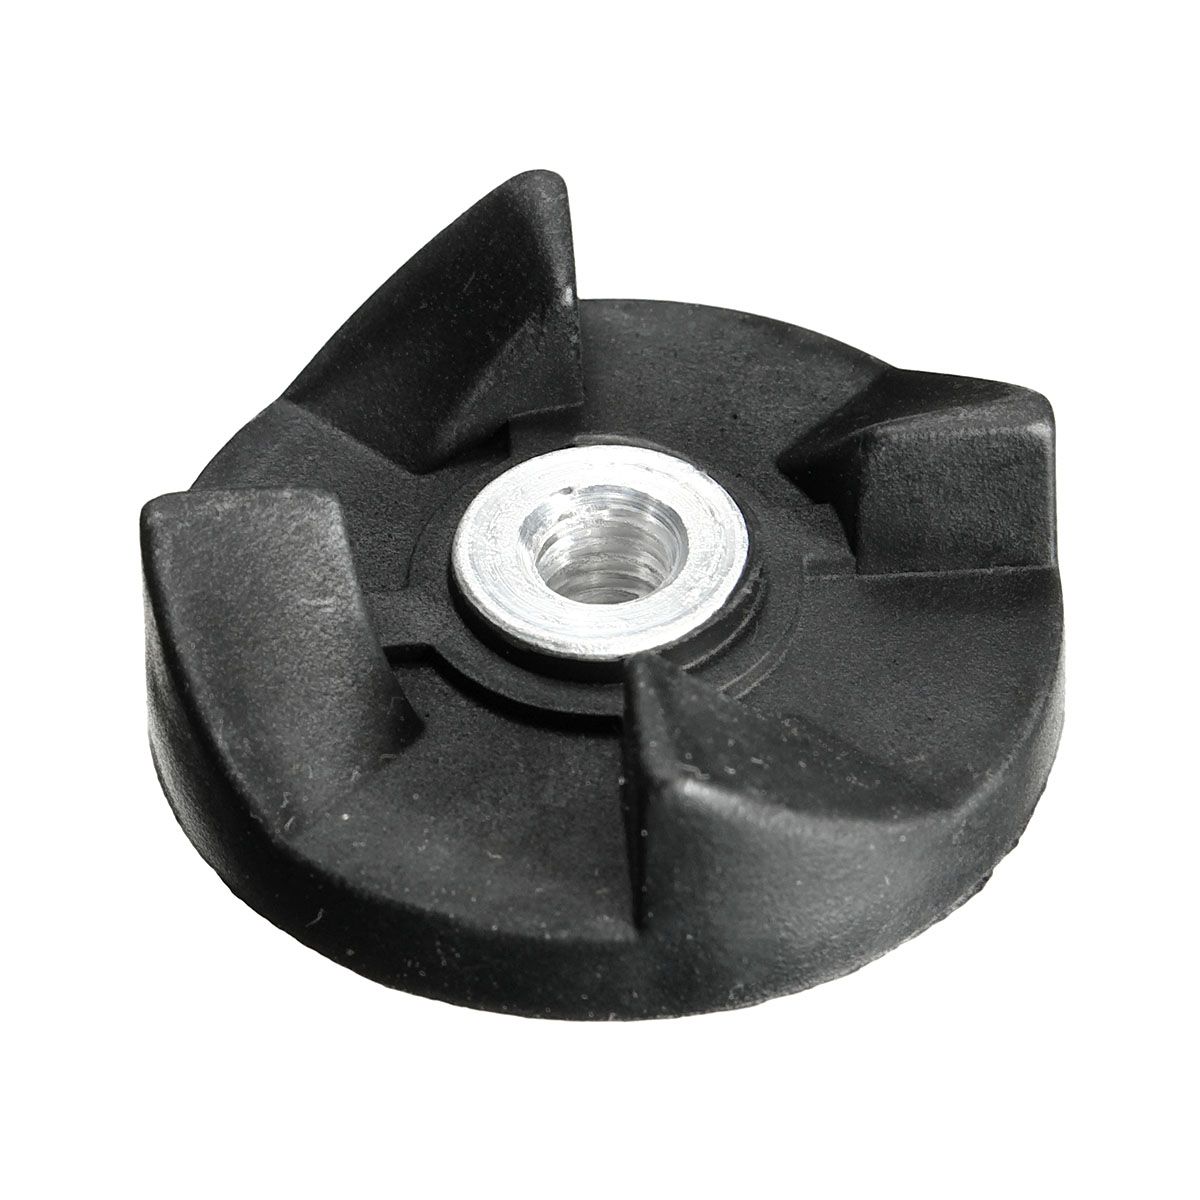 4Pcs-Black-Rubber-Gear-Spare-Replacement-Parts-for-Magic-Bullet-Cross-and-Flat-Blade-1169049